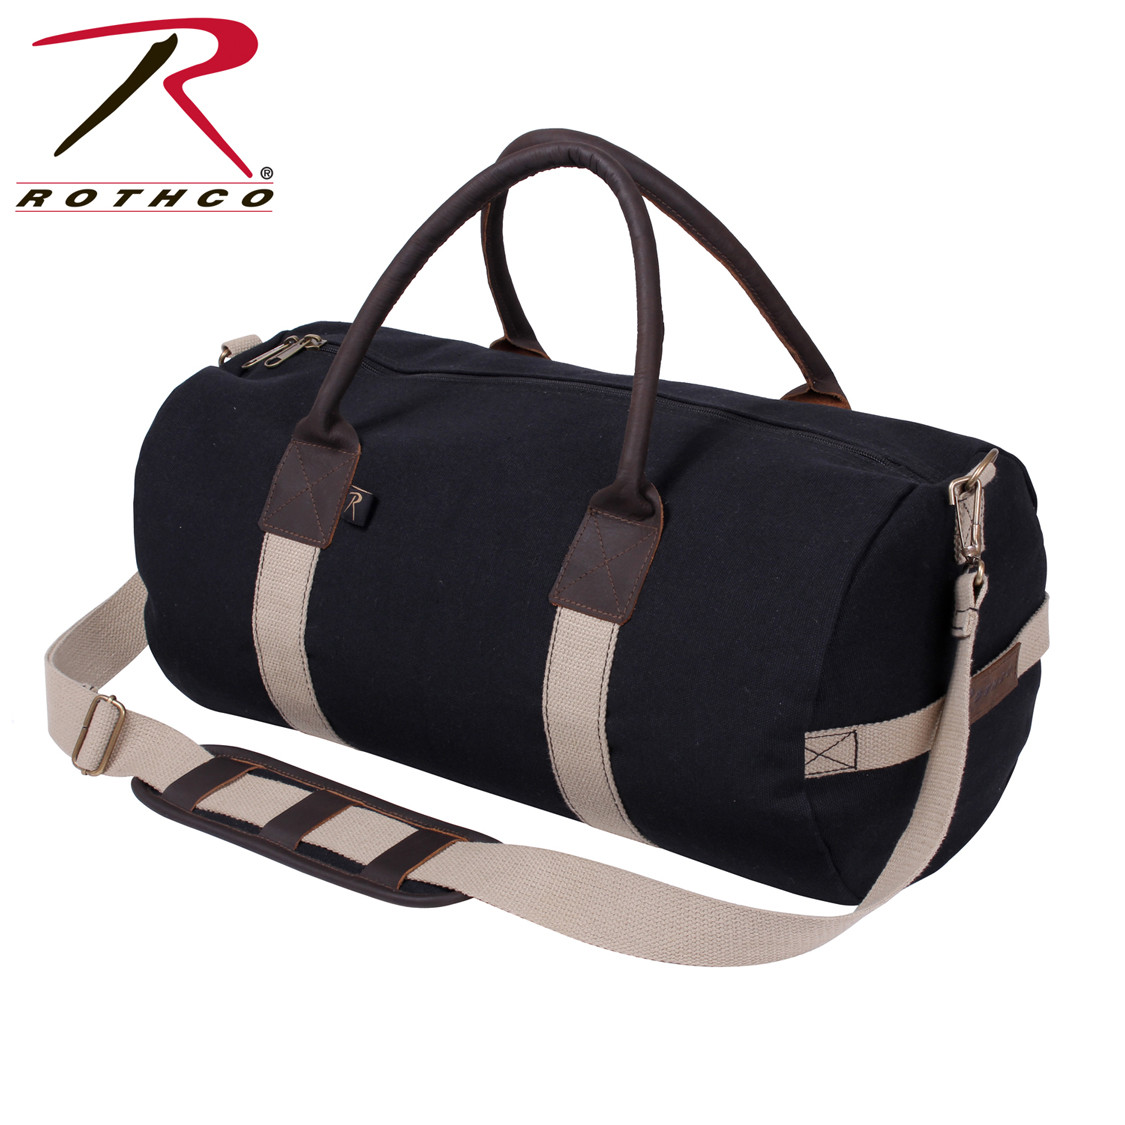 Download Shop Rothco Black Canvas & Leather Gym Bags - Fatigues ...